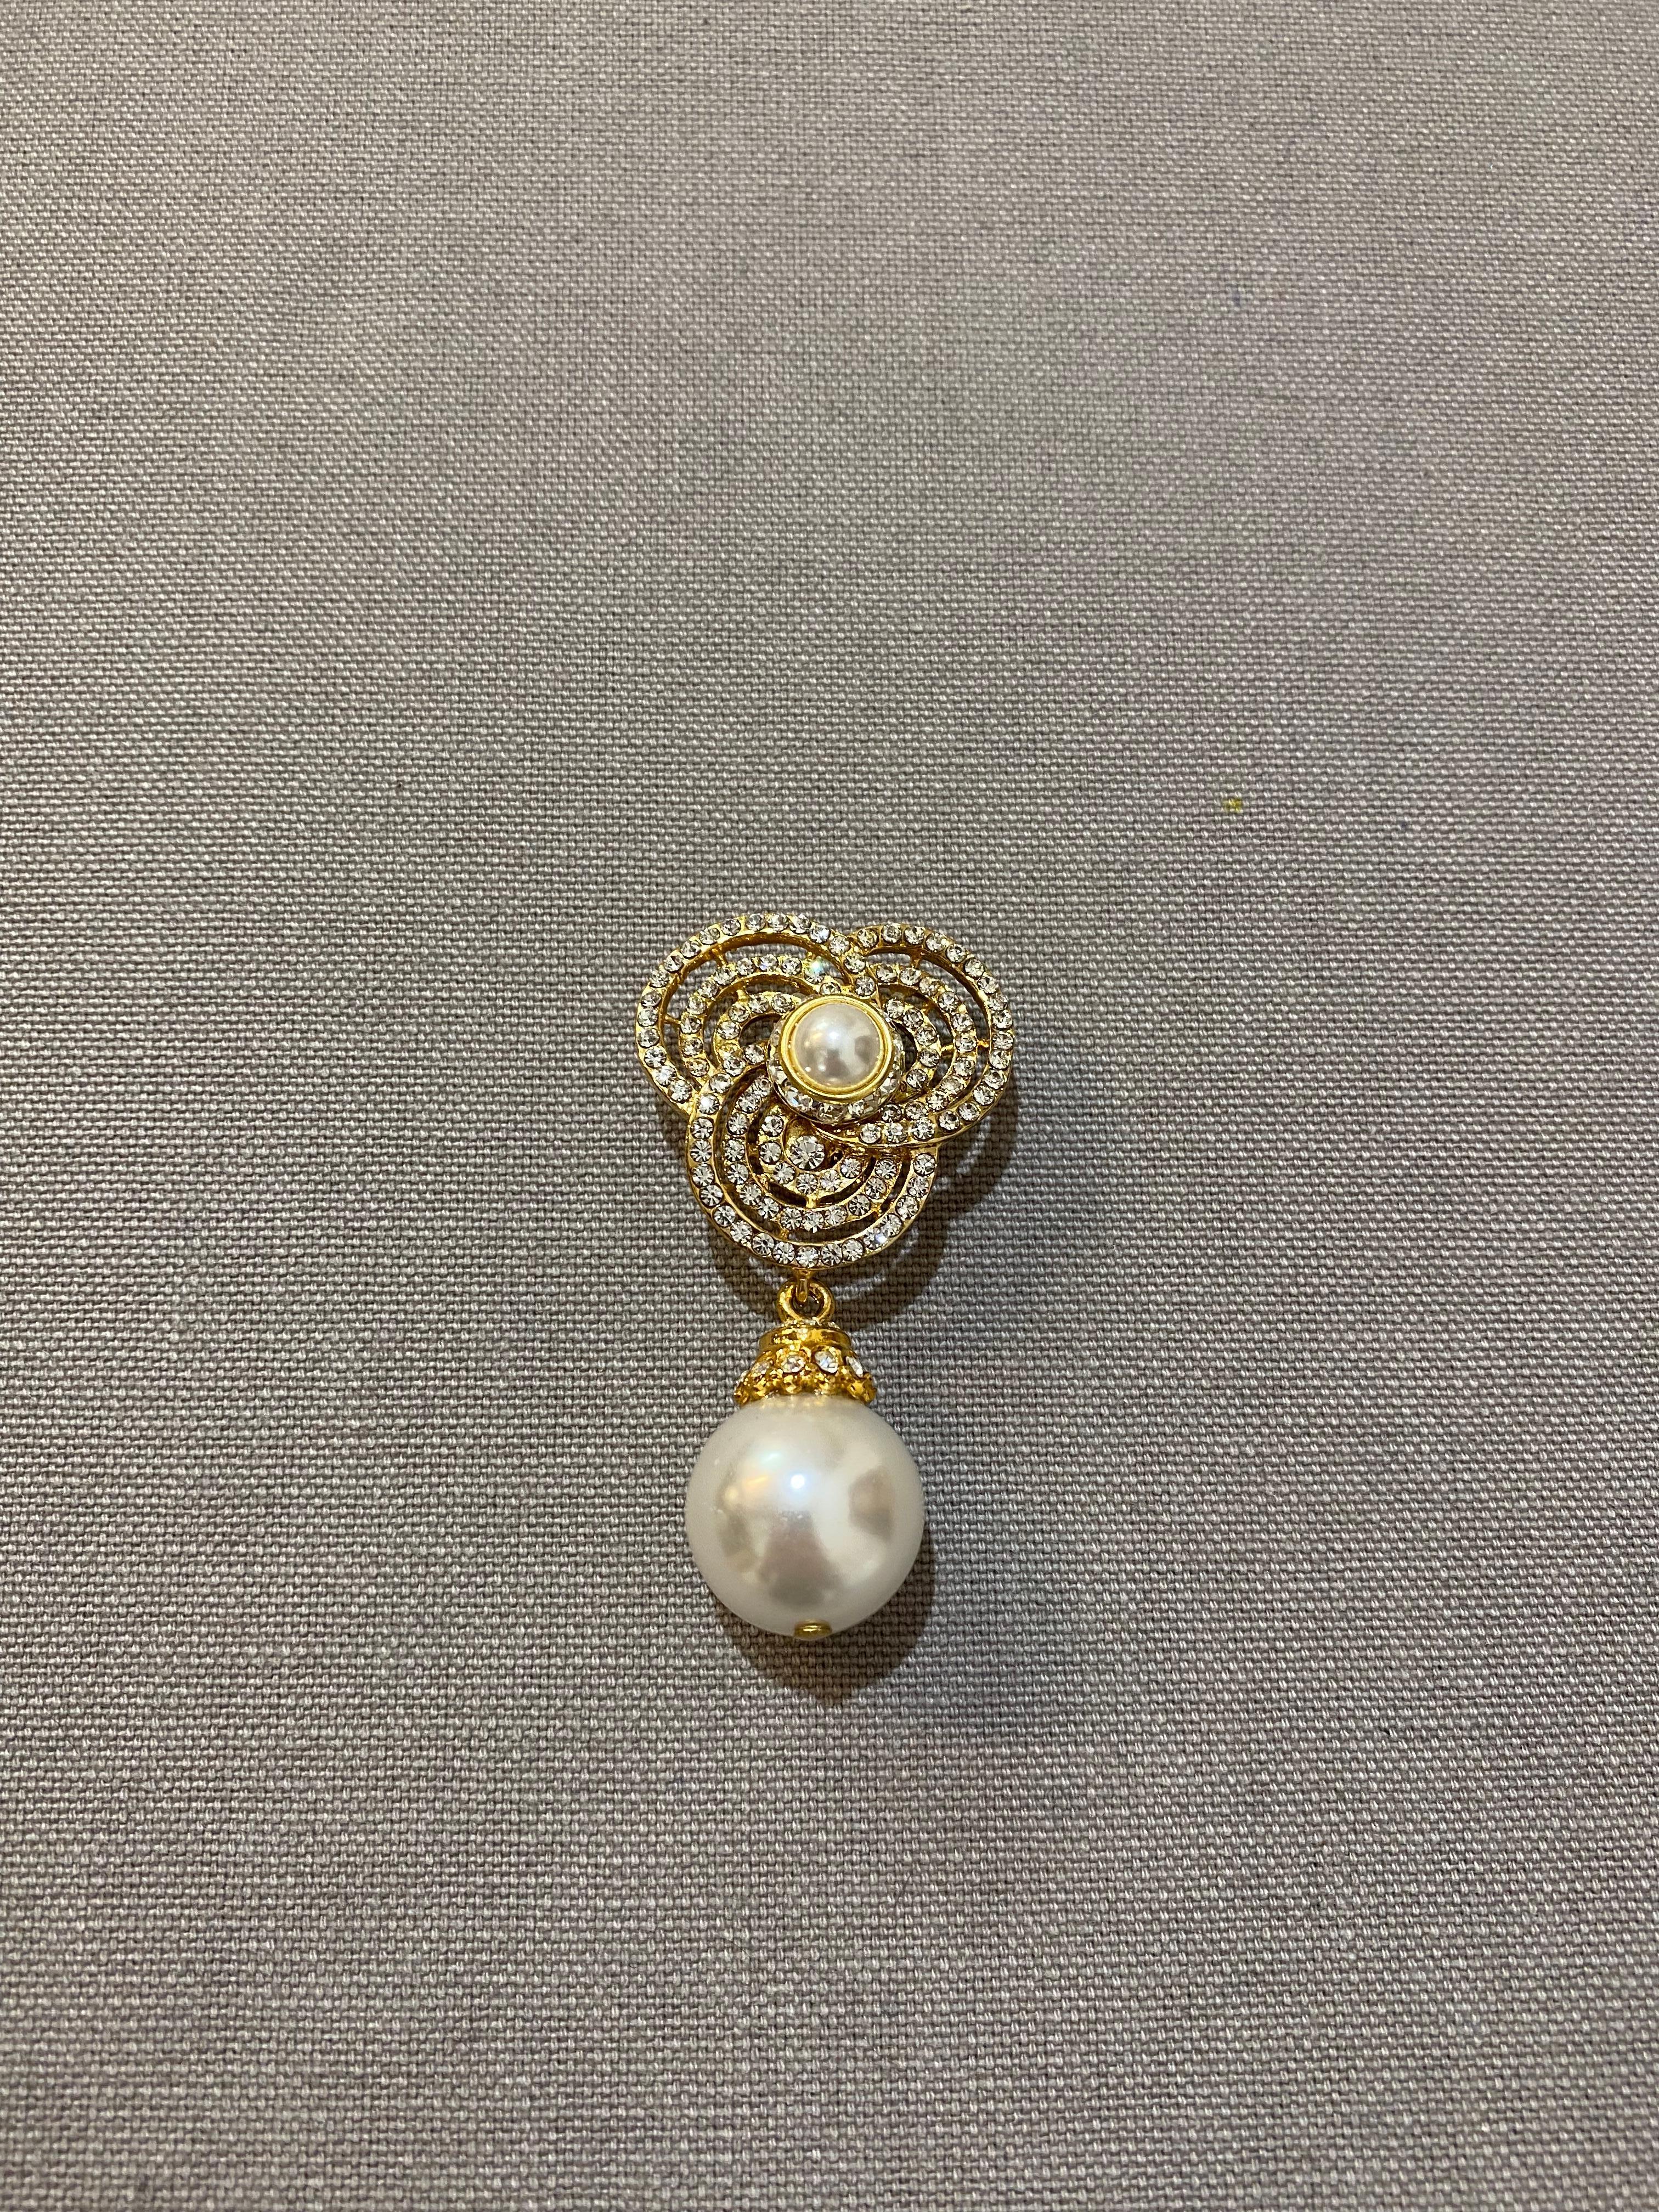 Beautiful and chic earrings by Carlo Zini
Non allergenic brass
18 KT Gold dipped
Amazing combinations of faux pearls and Swarovski crystals 
Clip on closure, pierced on request
100% Artisanal work, made in Milan
Worldwide express shipping included